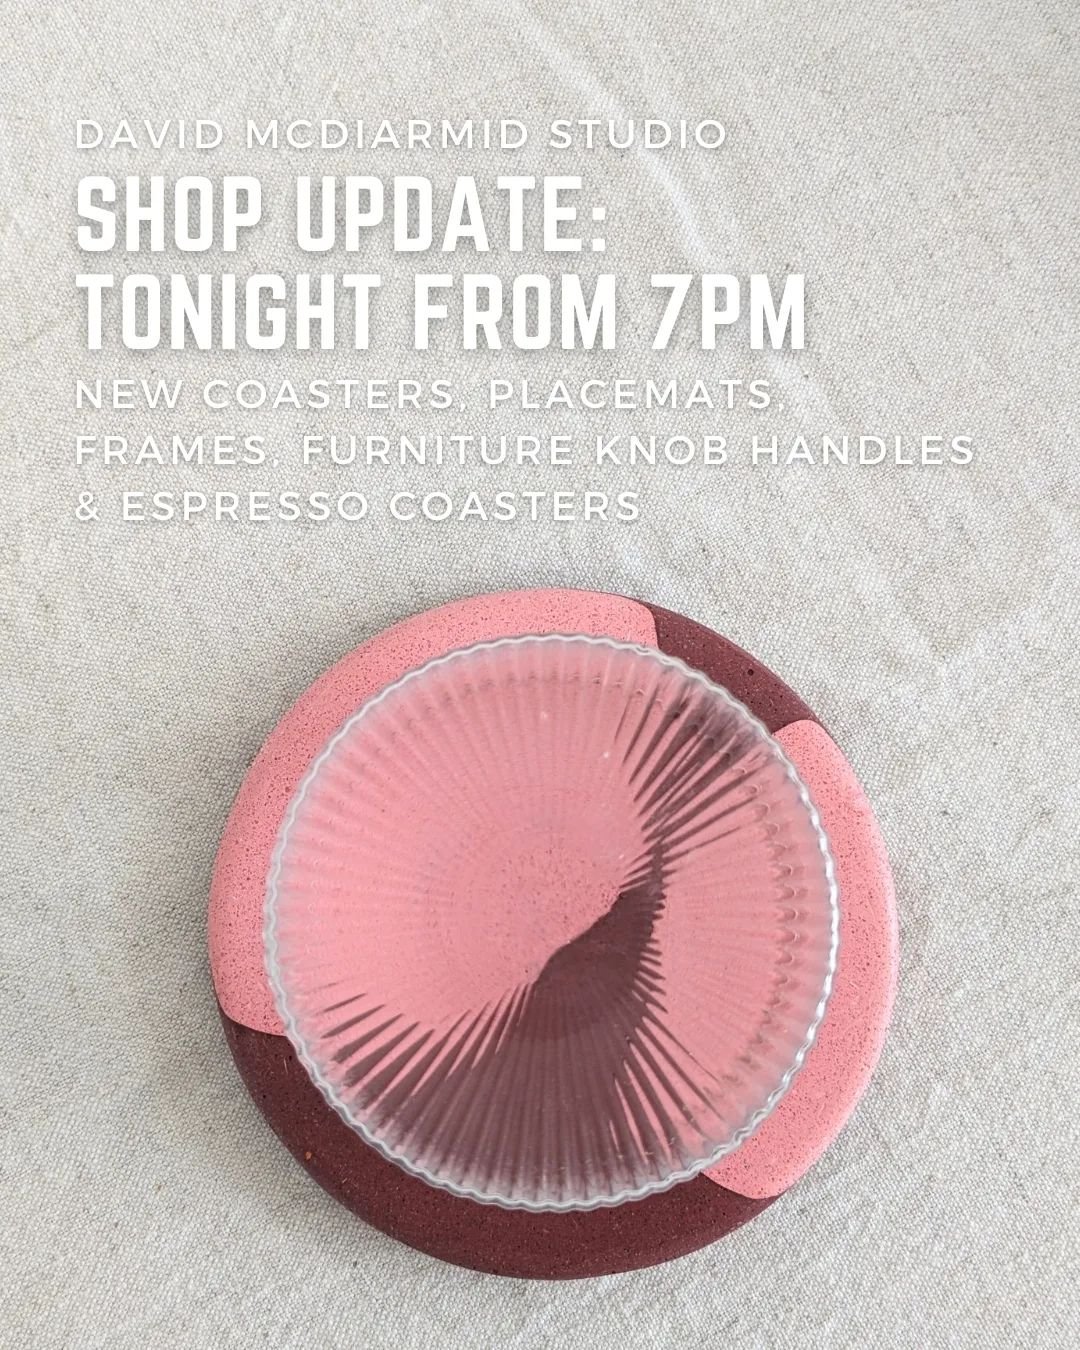 I've got a shop update tonight from 7pm!

Have a wee swipe to see a few sneaky perks for what to expect! Lots of new Jesmonite pieces with funky new finishes I've been working on

#shopupdate #coastersets
#coasters #placemats #espressocoaster #furnit